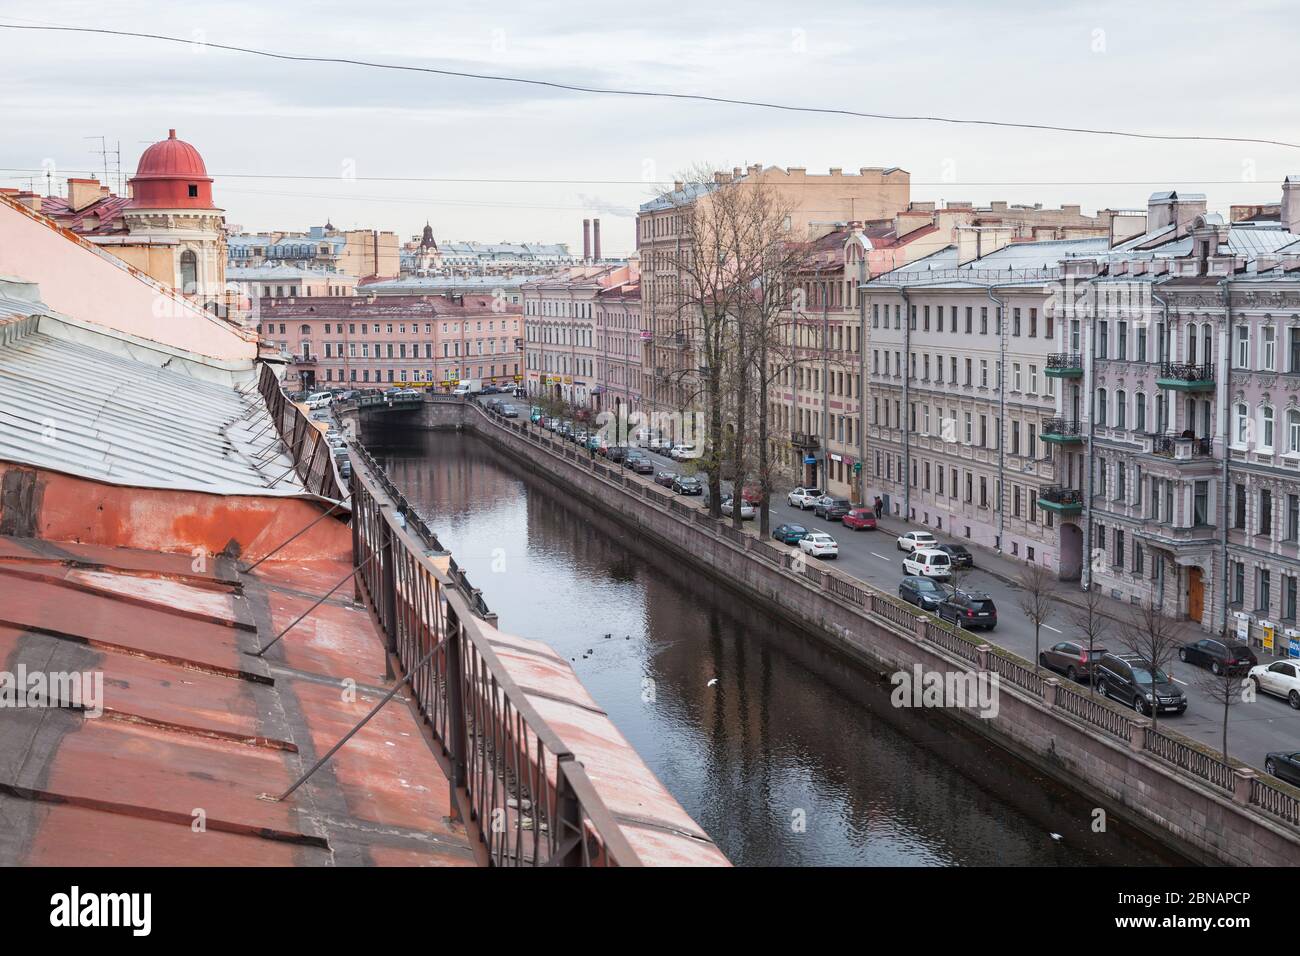 St. Petersburg, Russia - October 25, 2014: Griboyedov Canal perspective, old roof view of Saint-Petersburg Stock Photo